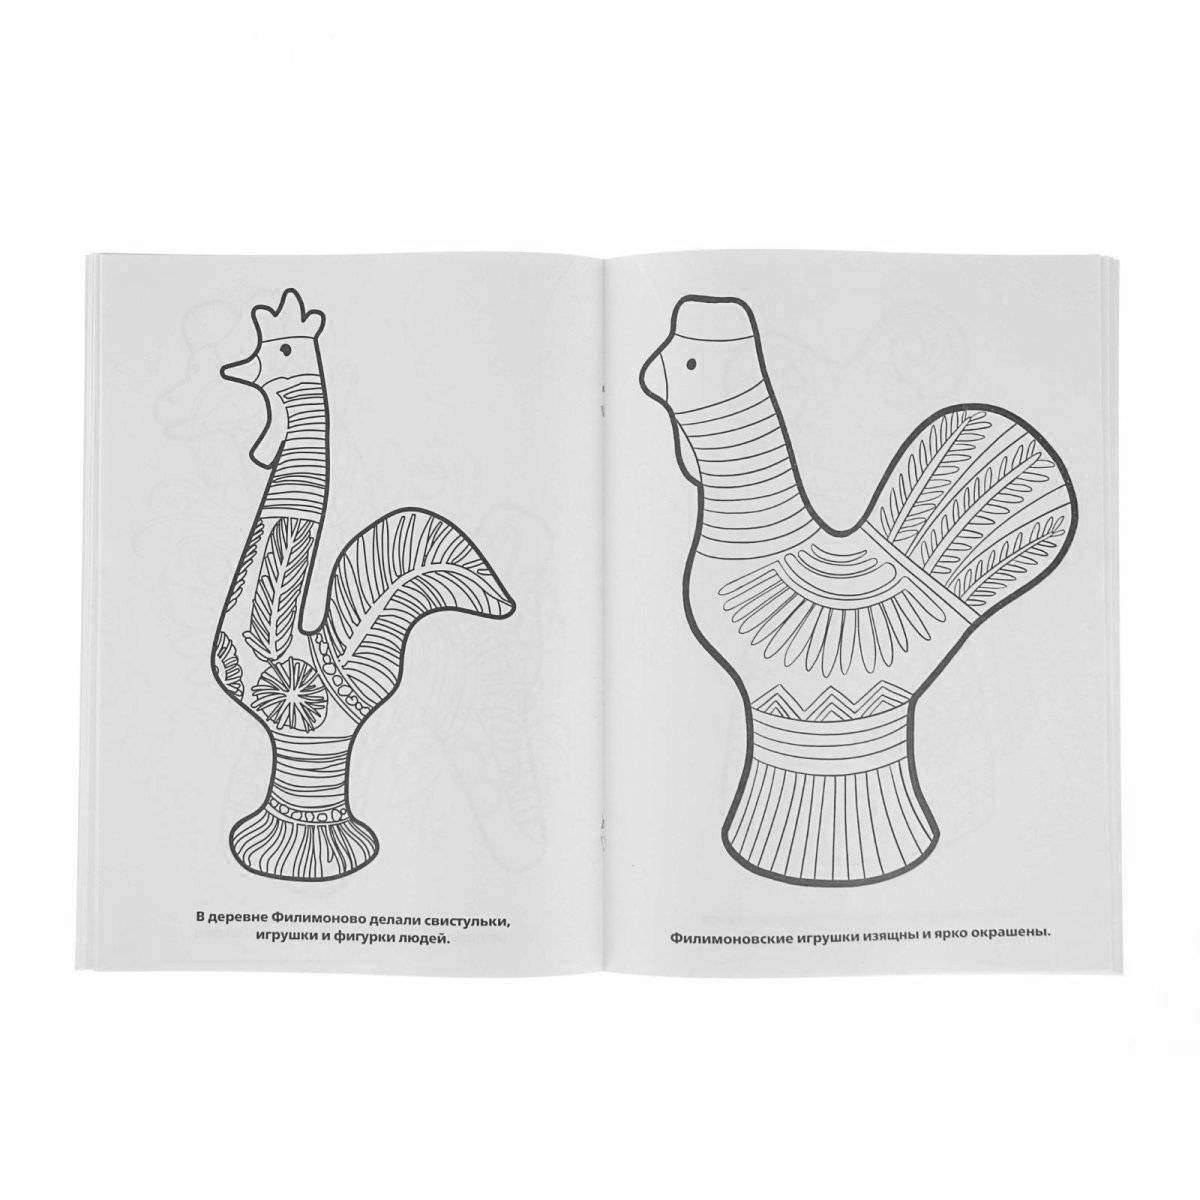 Adorable whistle coloring book for kids